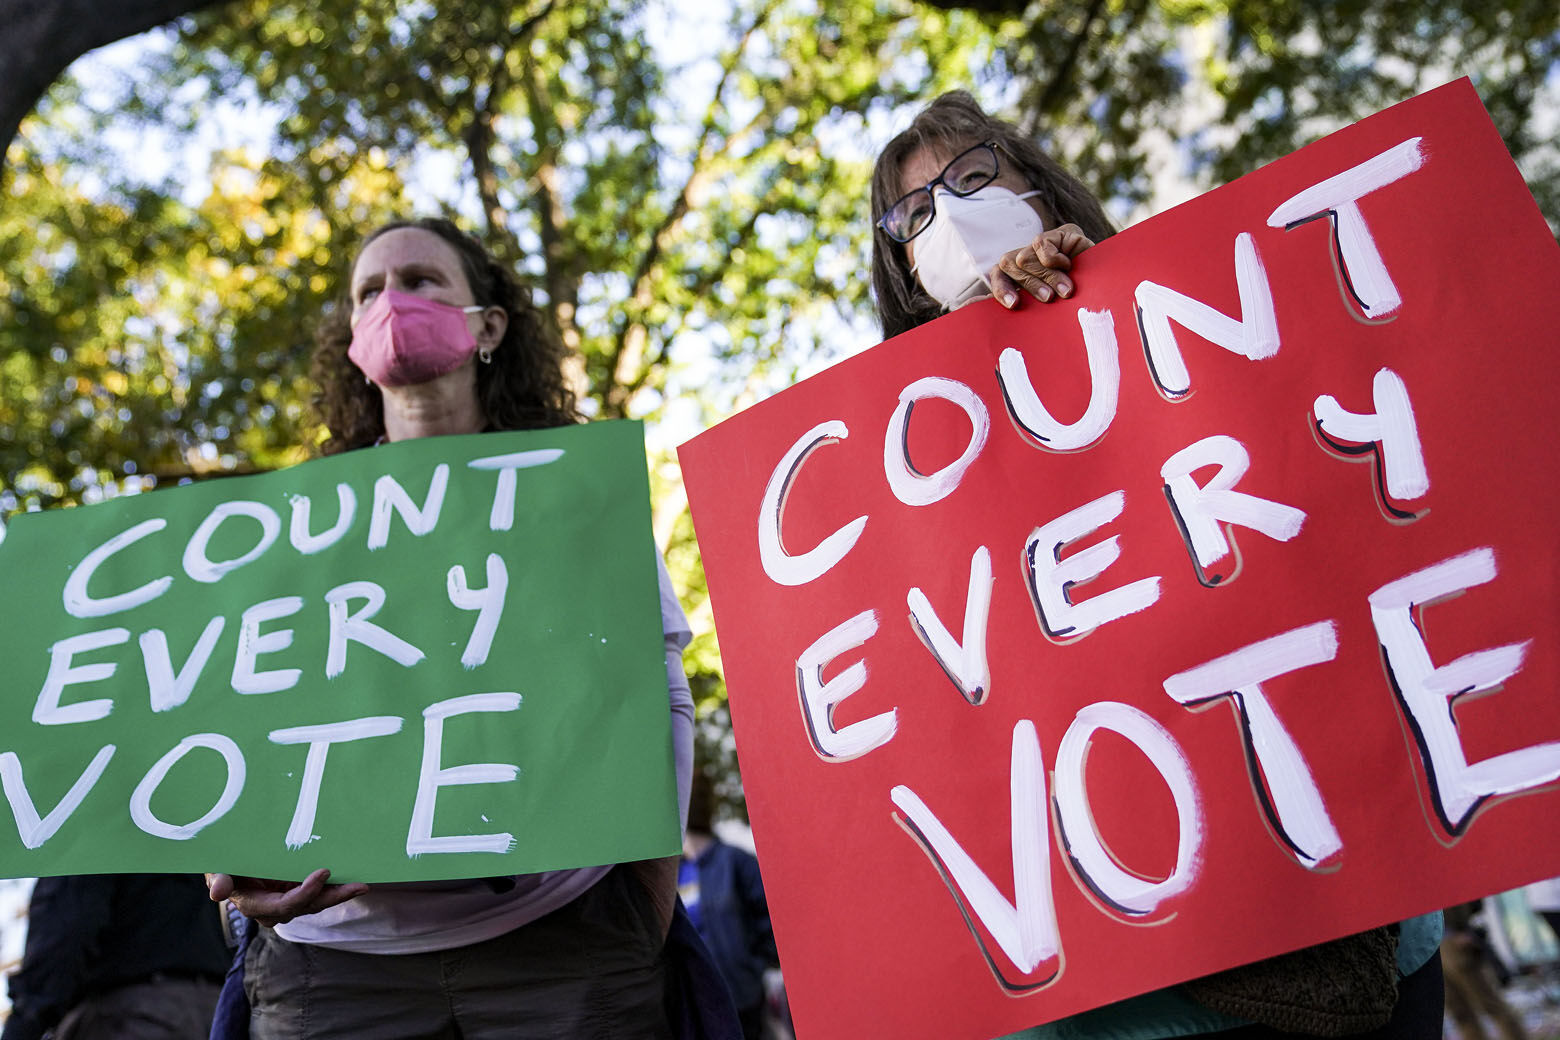 Demonstrators attend a rally to support all votes being counted one day after Election Day, Wednesday, Nov. 4, 2020, in Washington. (AP Photo/John Minchillo)